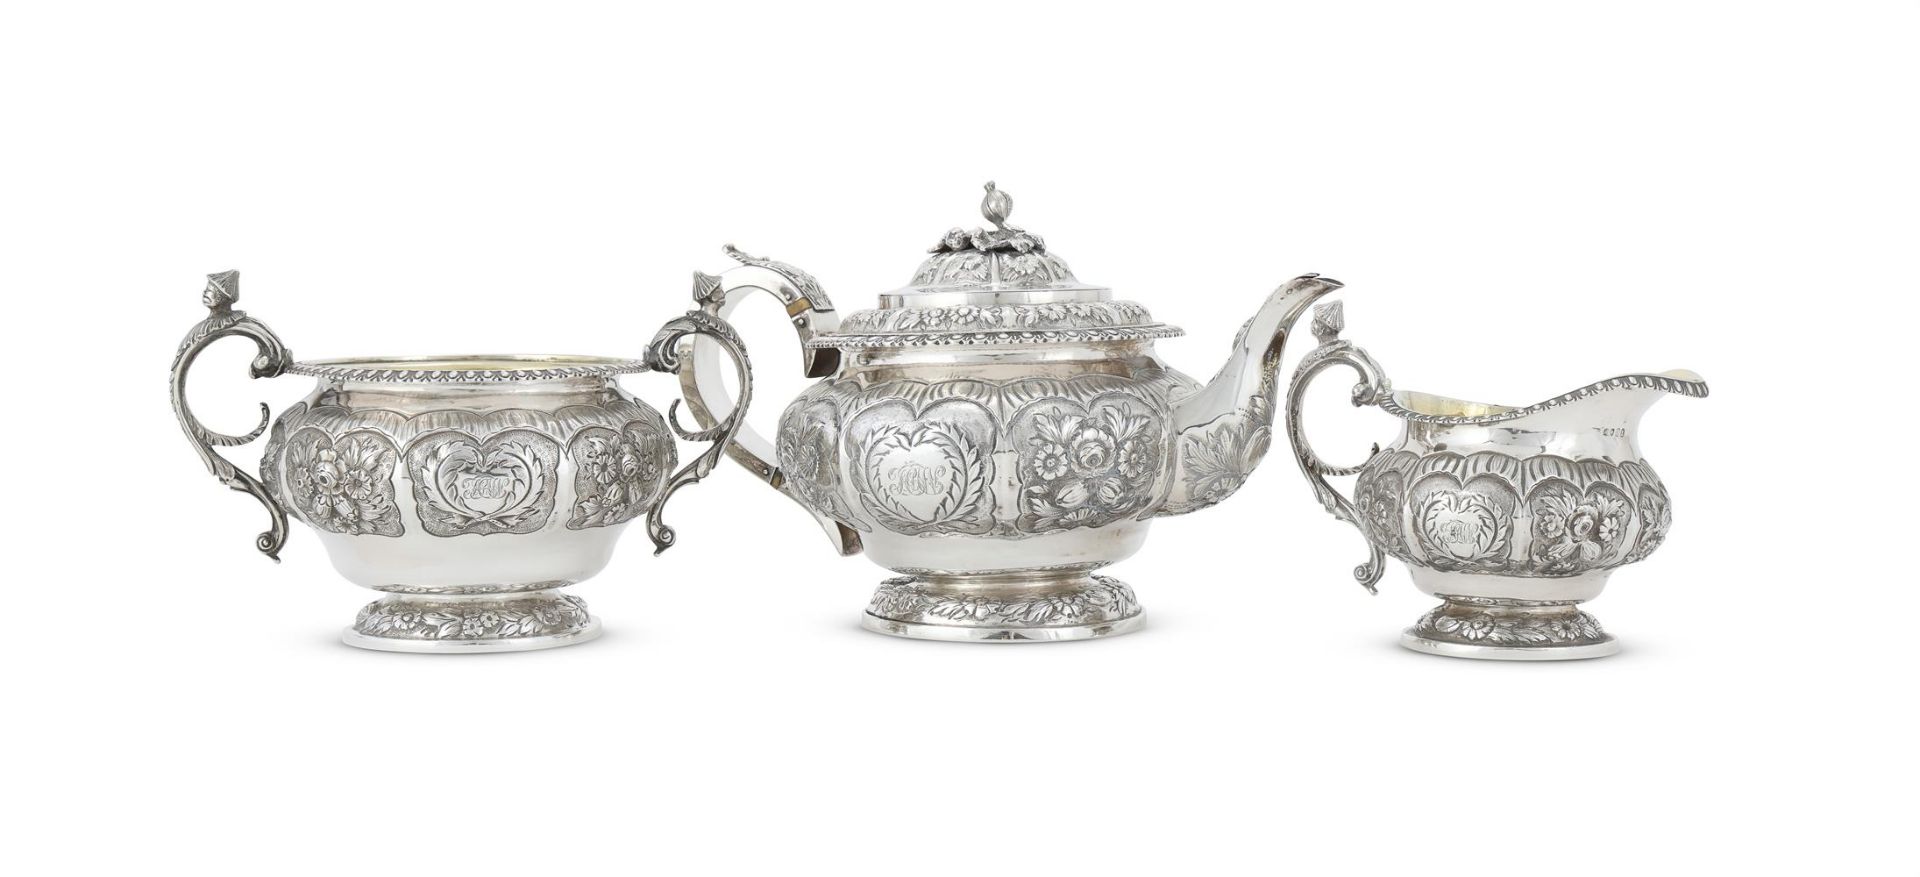 Y A SILVER MATCHED FOUR PIECE BALUSTER TEA AND COFFEE SET - Image 2 of 6